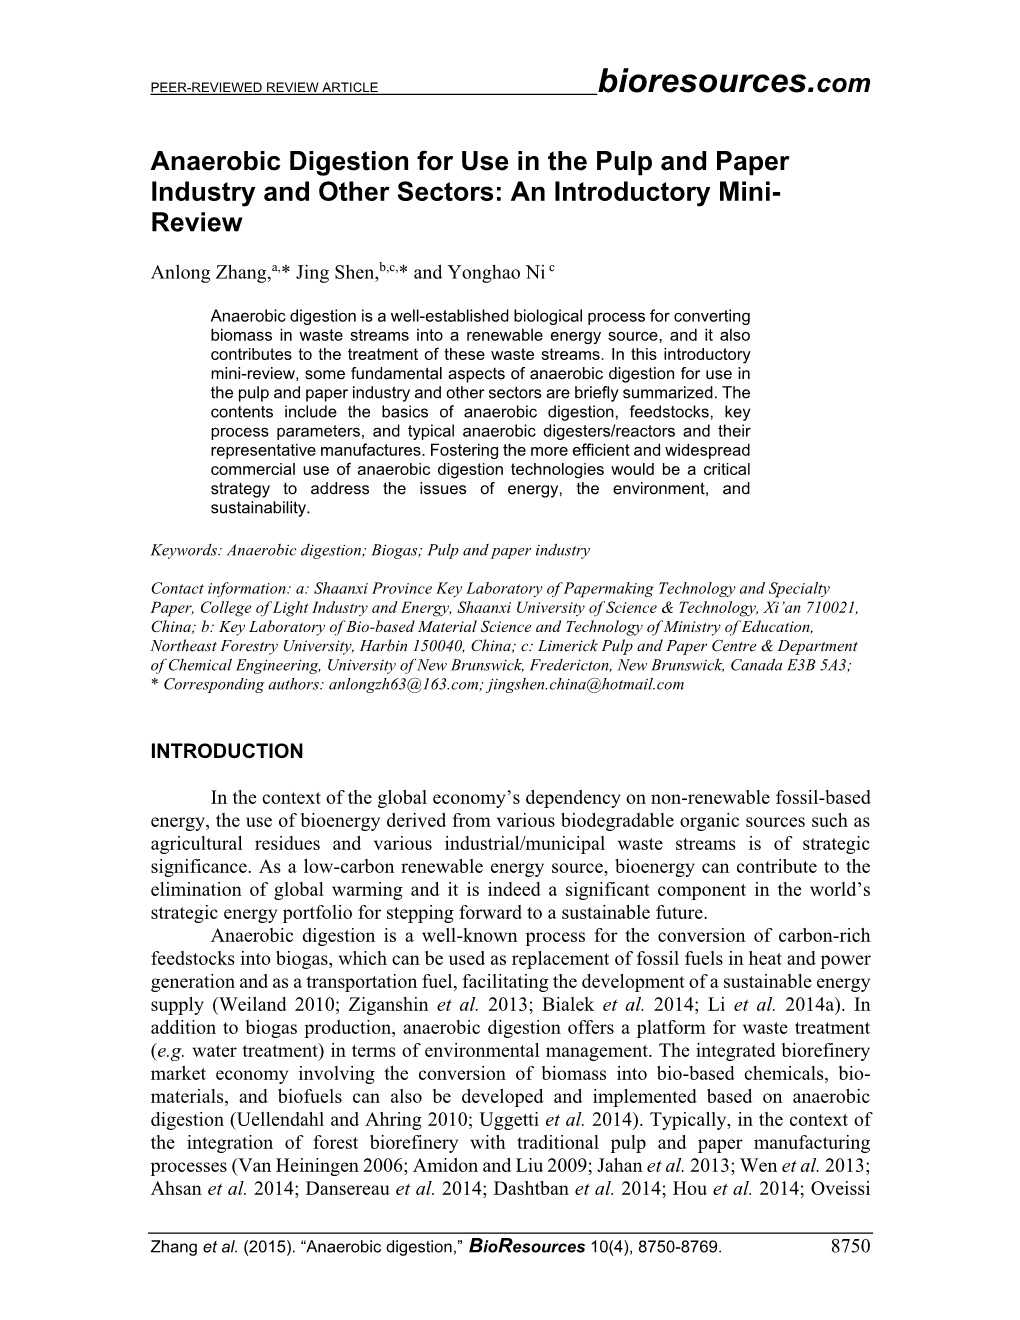 Anaerobic Digestion for Use in the Pulp and Paper Industry and Other Sectors: an Introductory Mini- Review